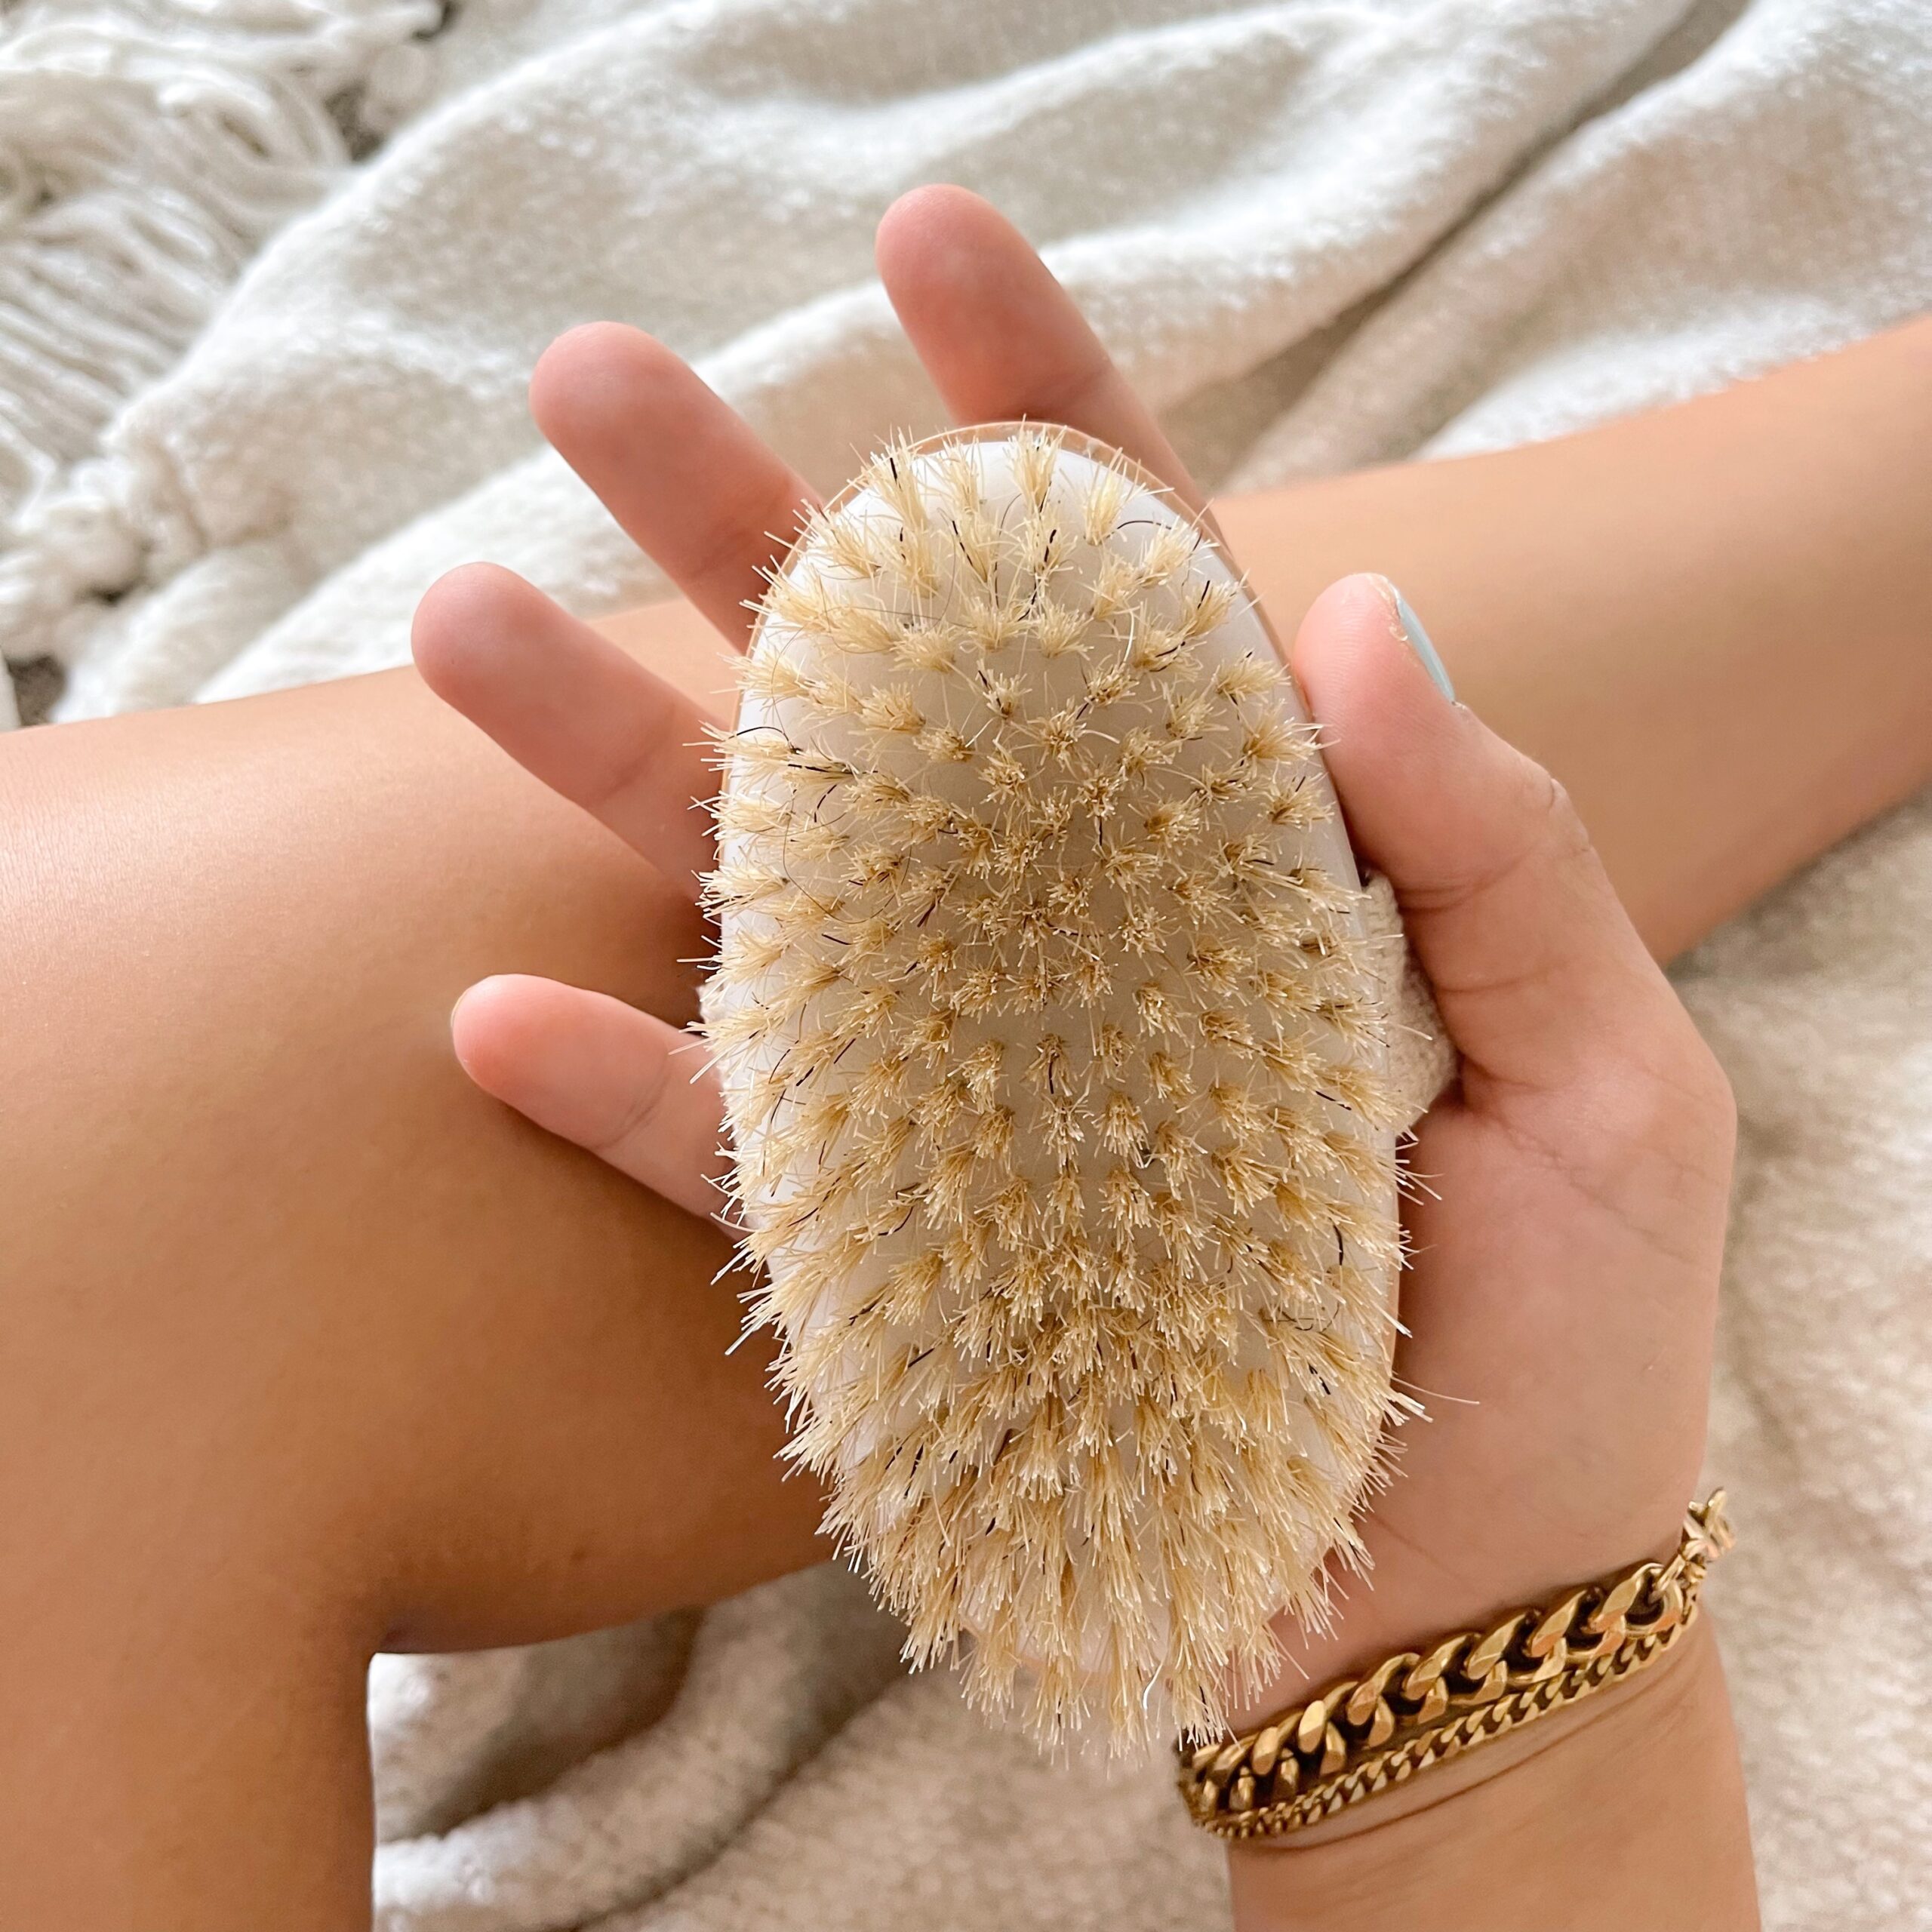 How To Dry Brush Your Body & What Are The Benefits